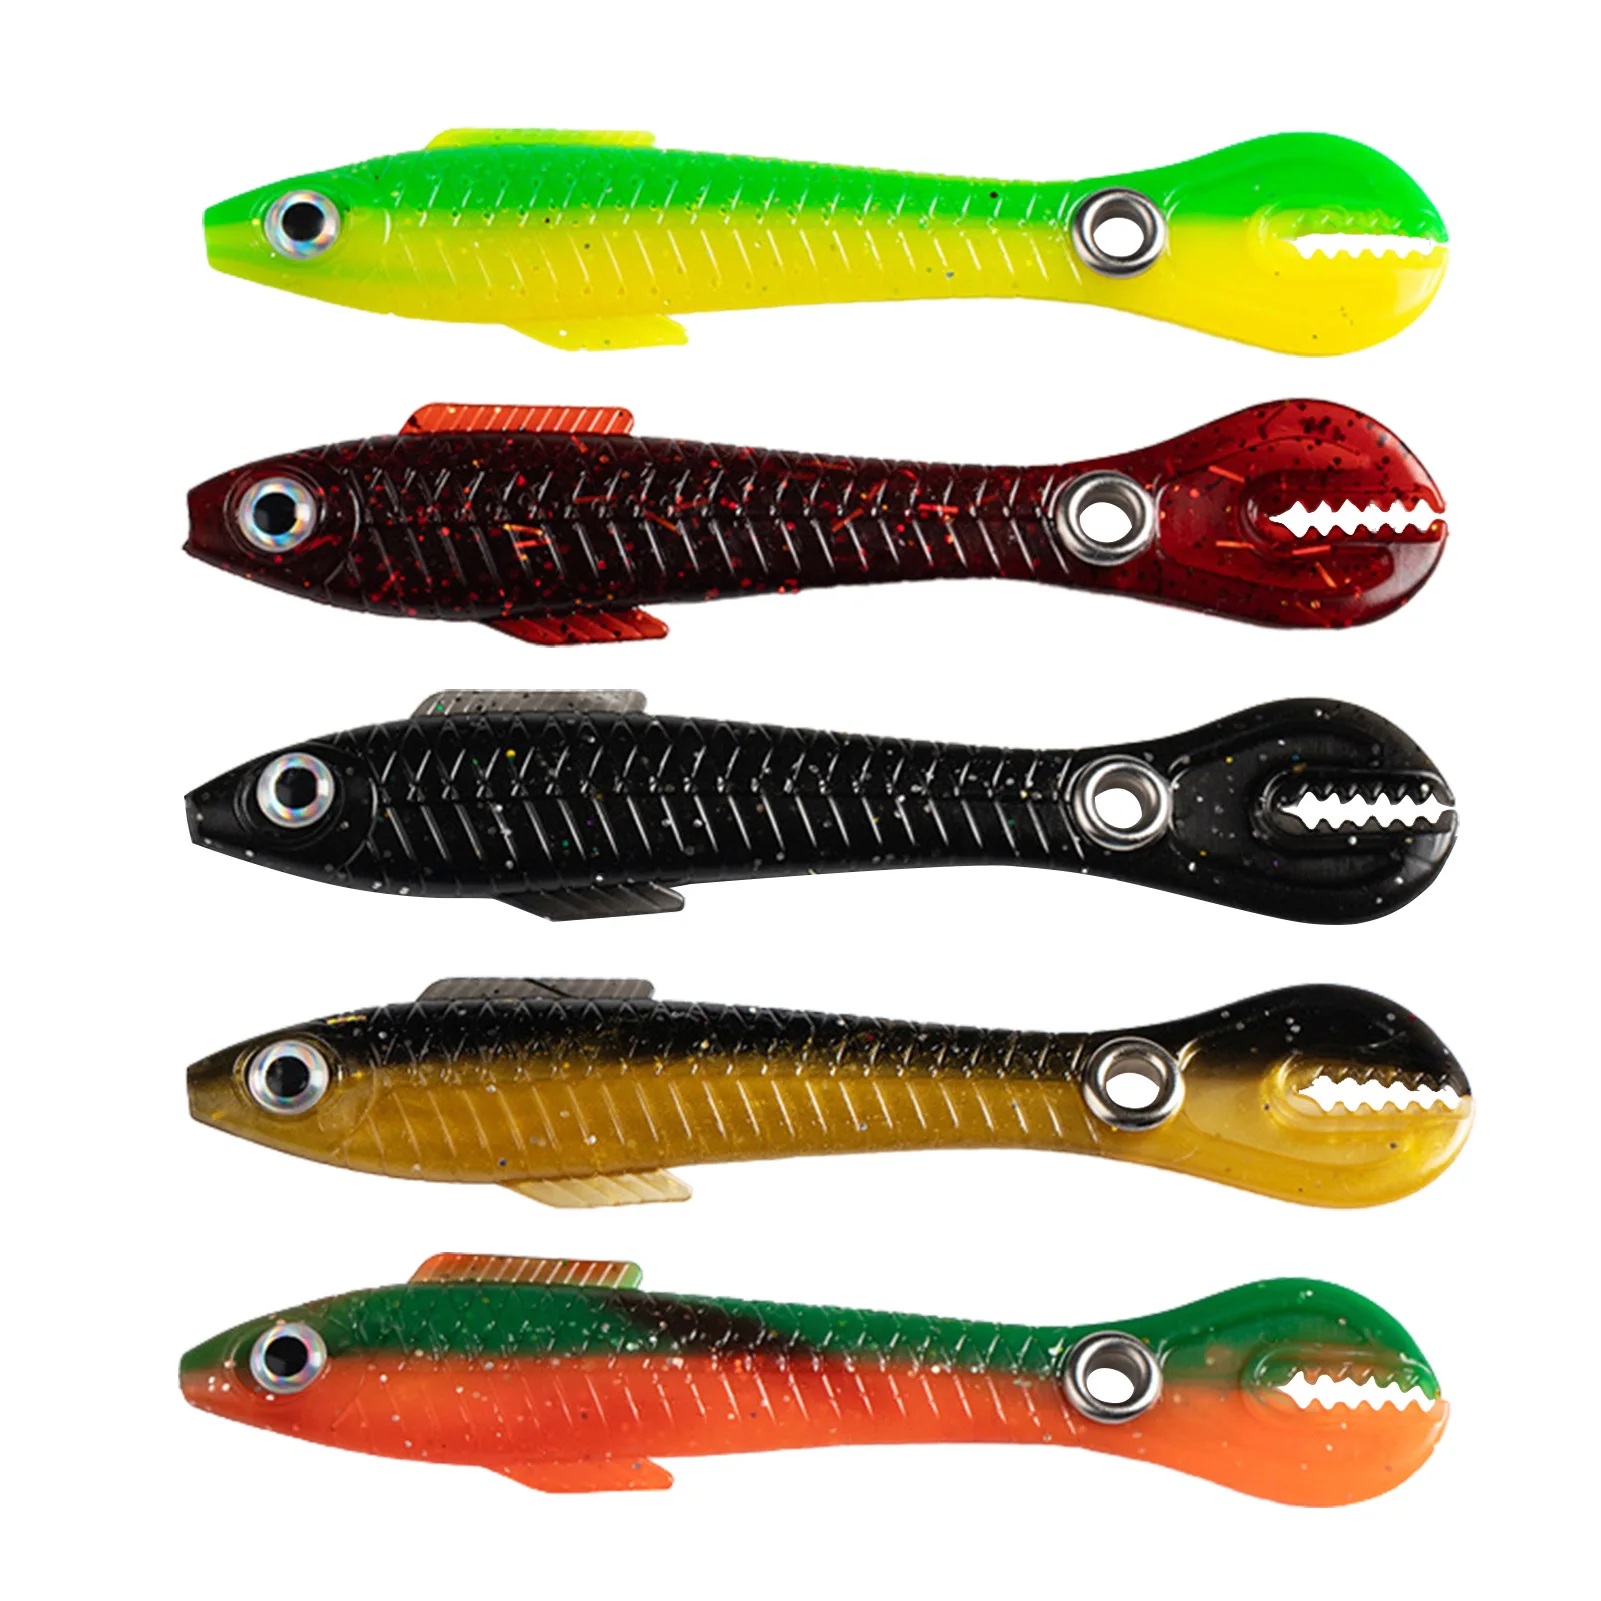 Realistic Fishing Lures 5pcs Bass Swimbaits Fishing Bait Big Tail With Jig  Head Soft Shrimp Lures For Fishing Lovers - AliExpress